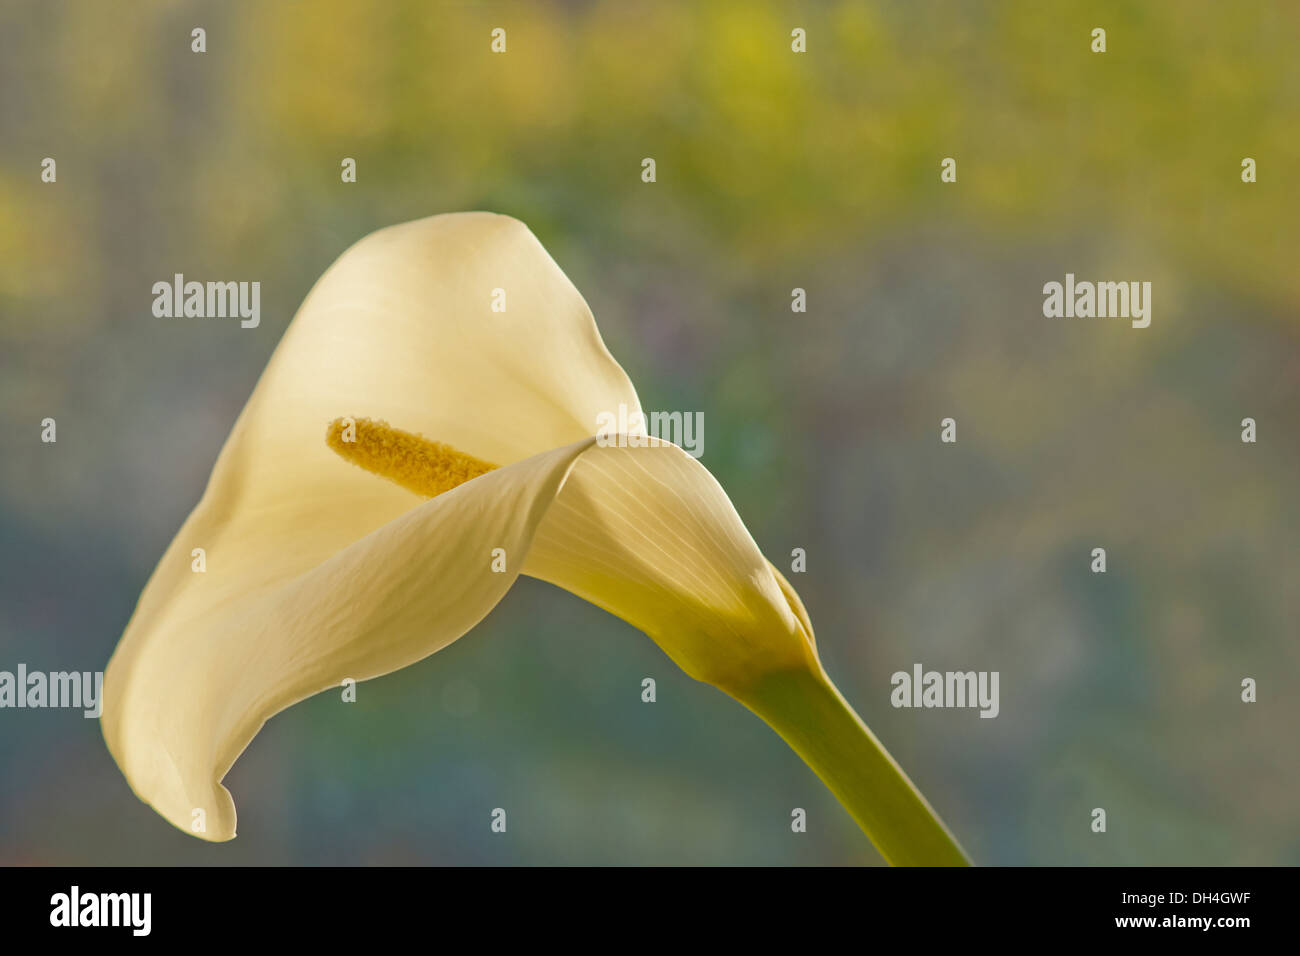 Calla lily. Single funnel shaped flower with white spathe and yellow spadix. Stock Photo